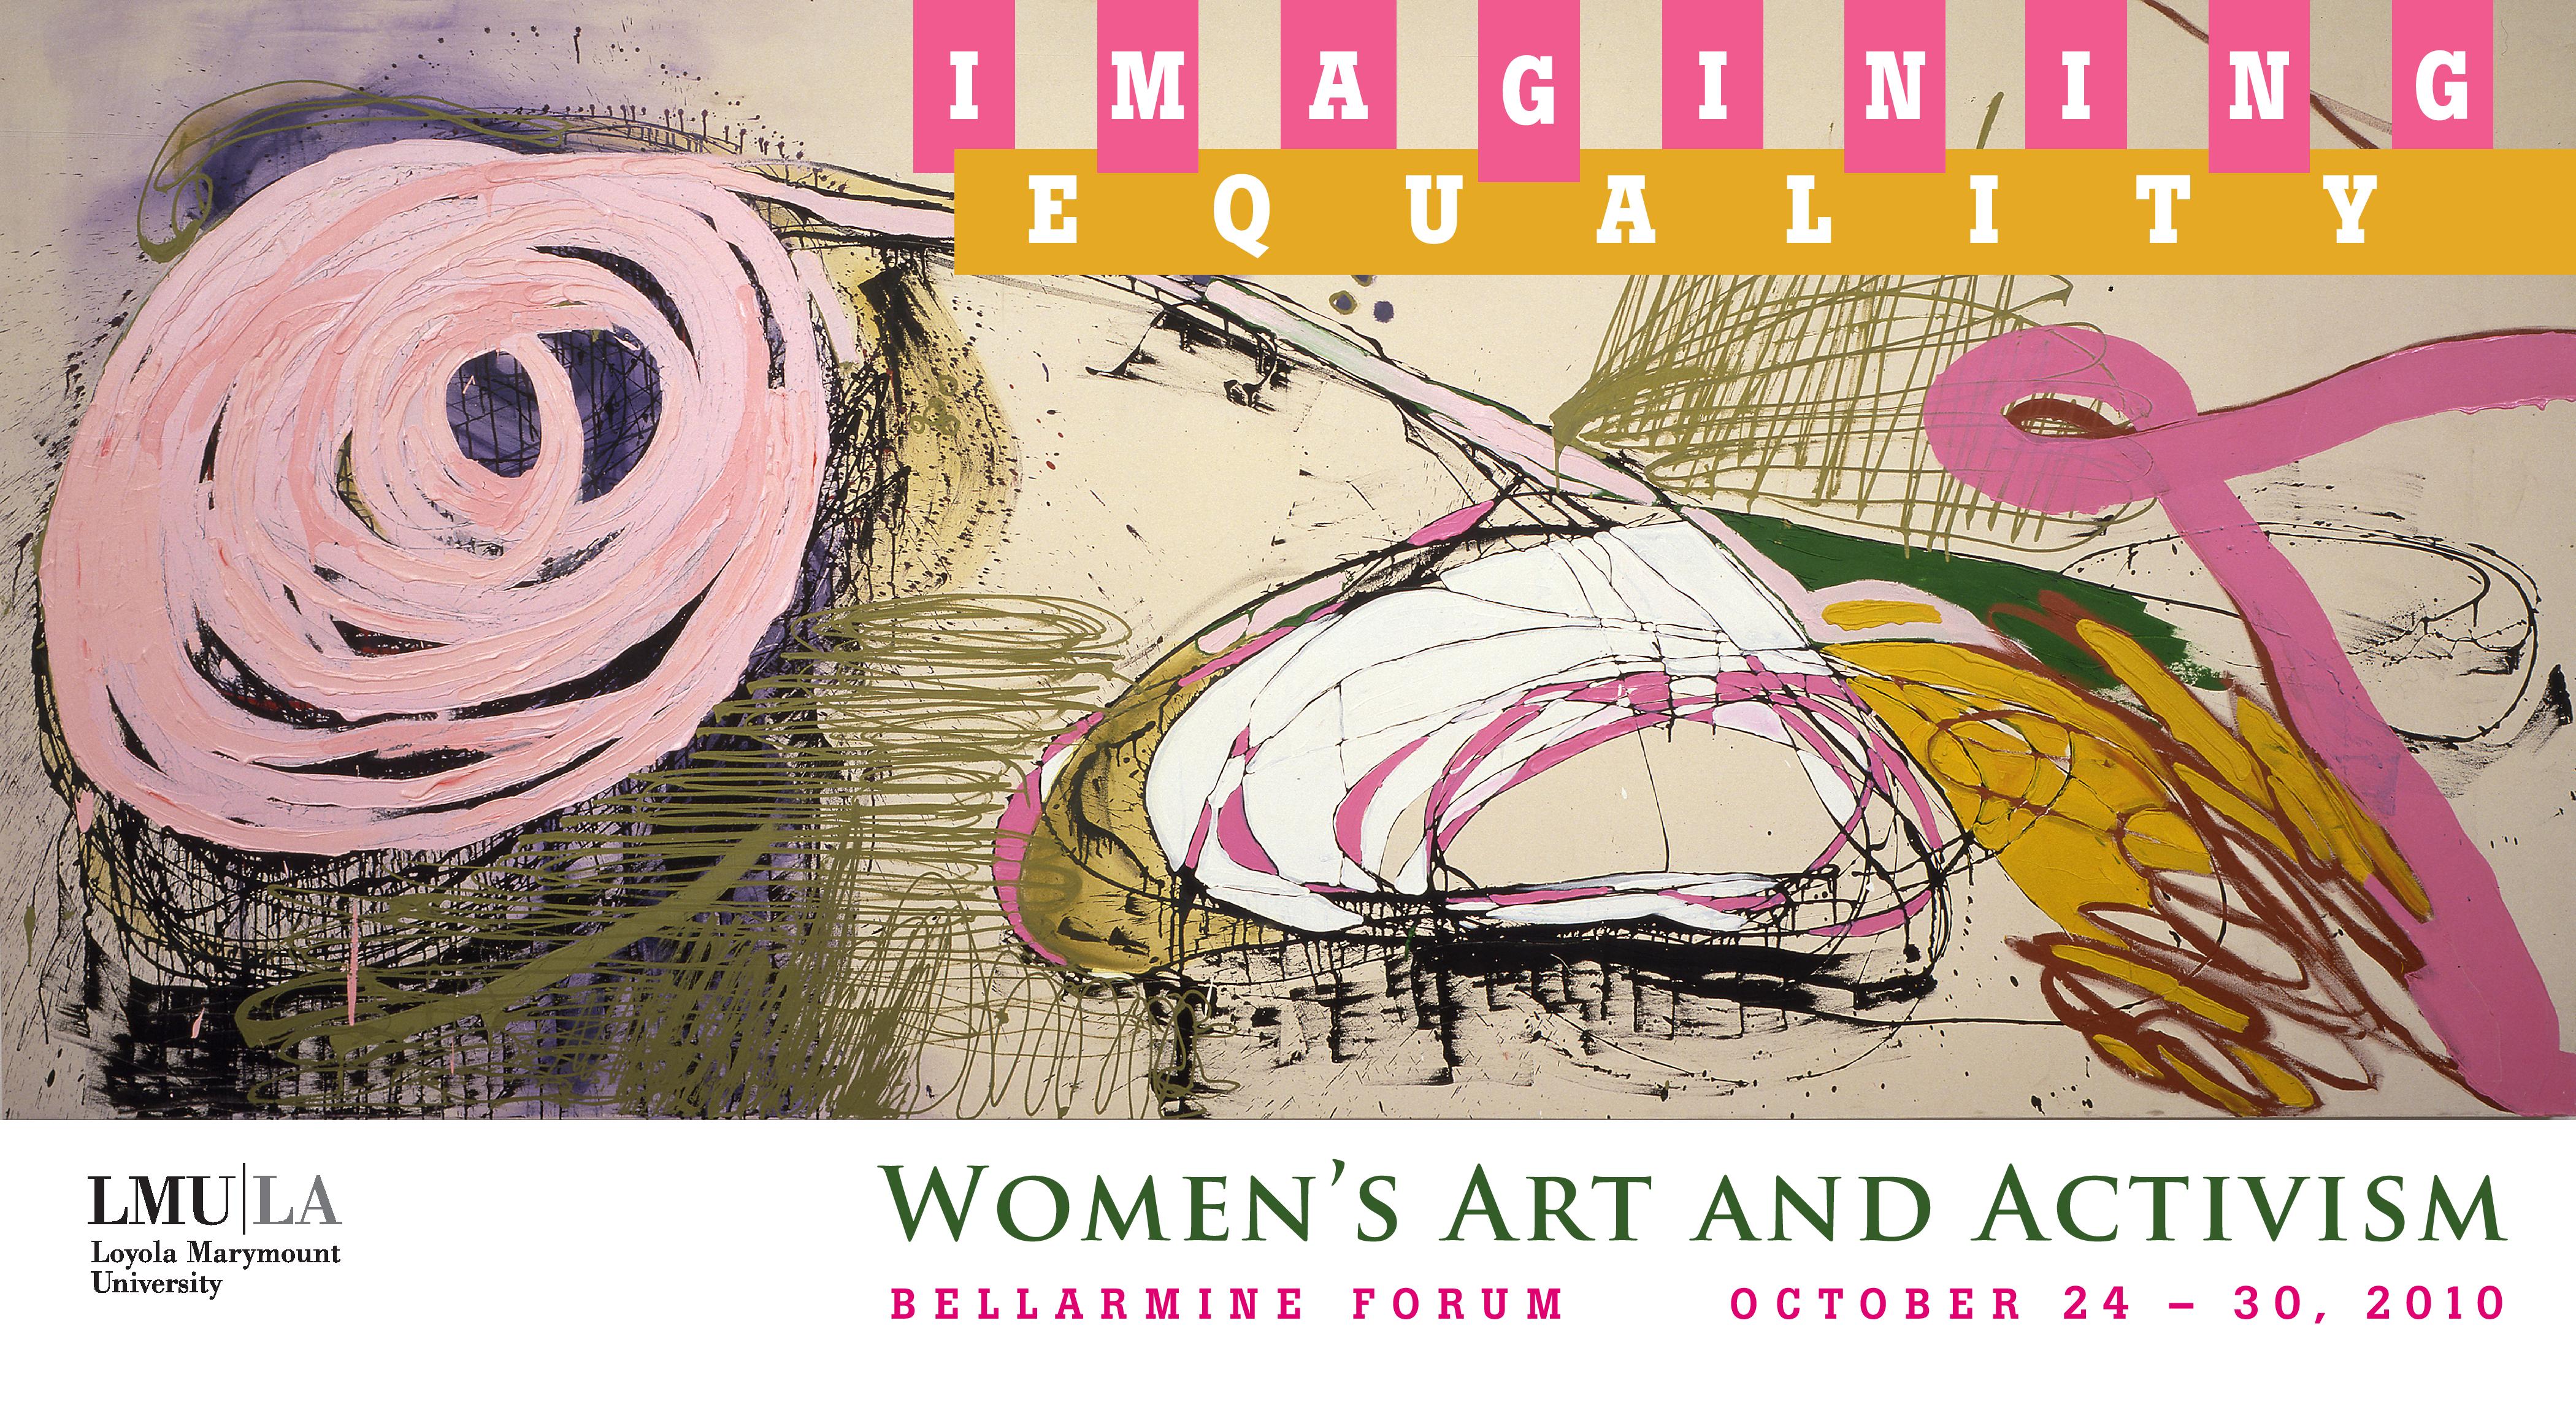 2010: Imagining Equality: Women's Art and Activism